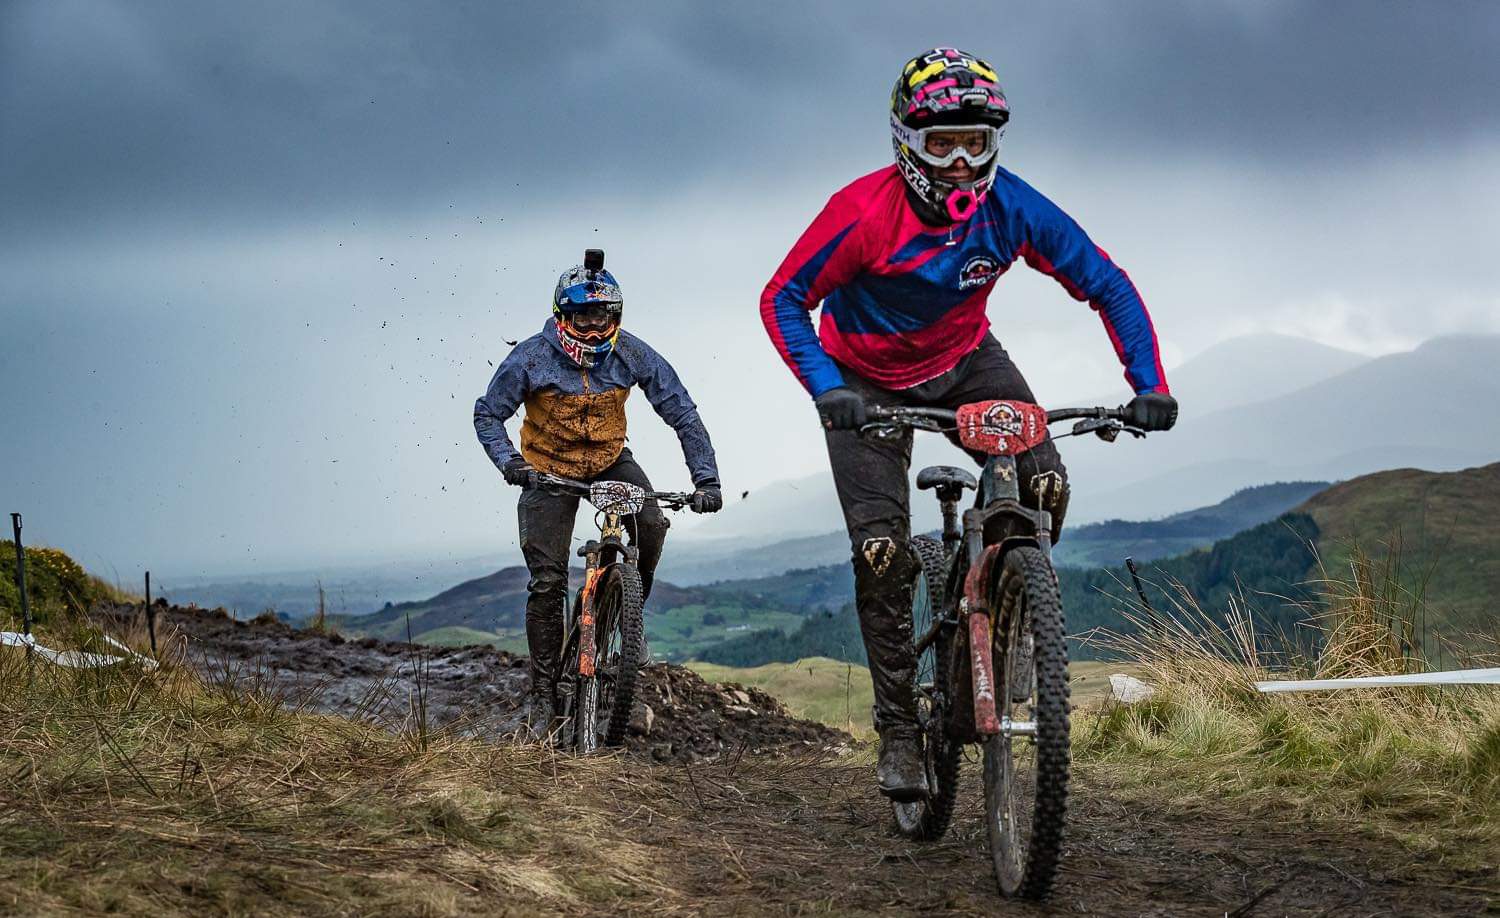 Grant wins Red Bull Fox Hunt for the second time